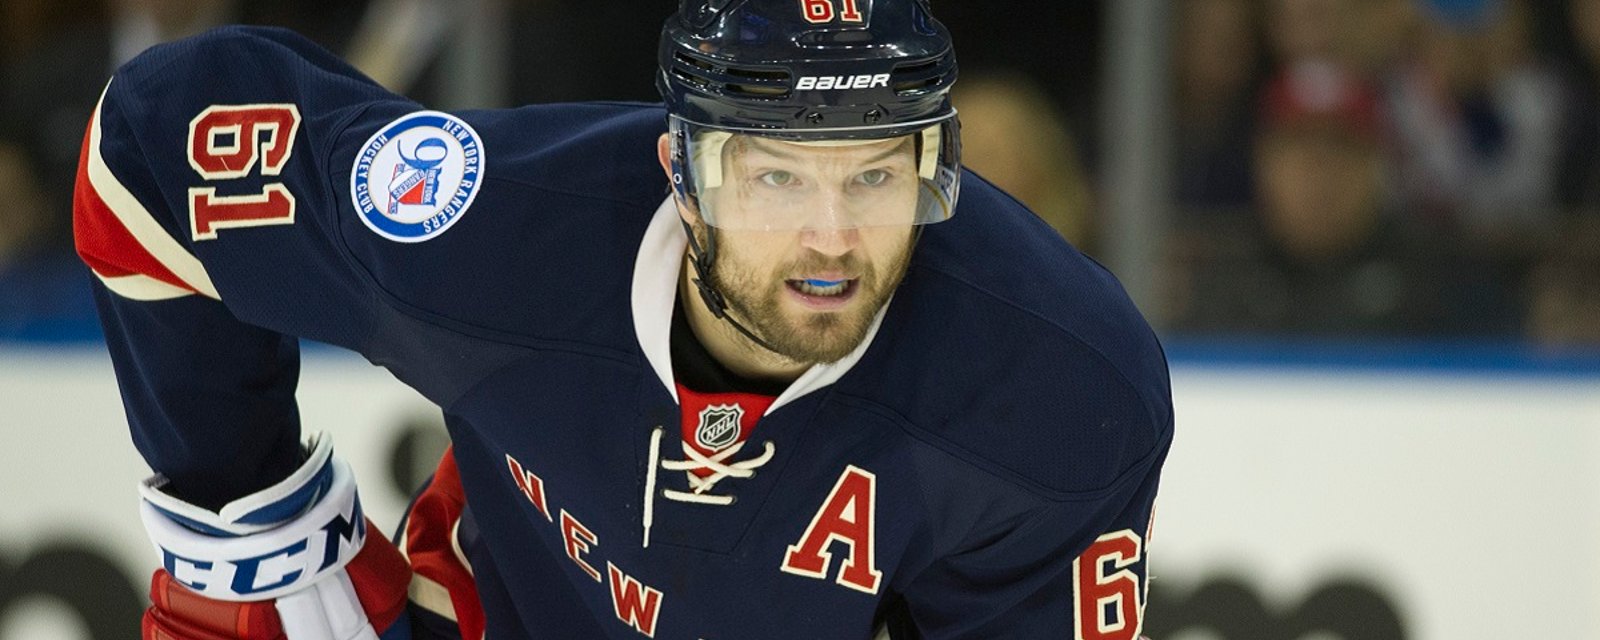 Update: More bad news for Rick Nash and the Rangers.